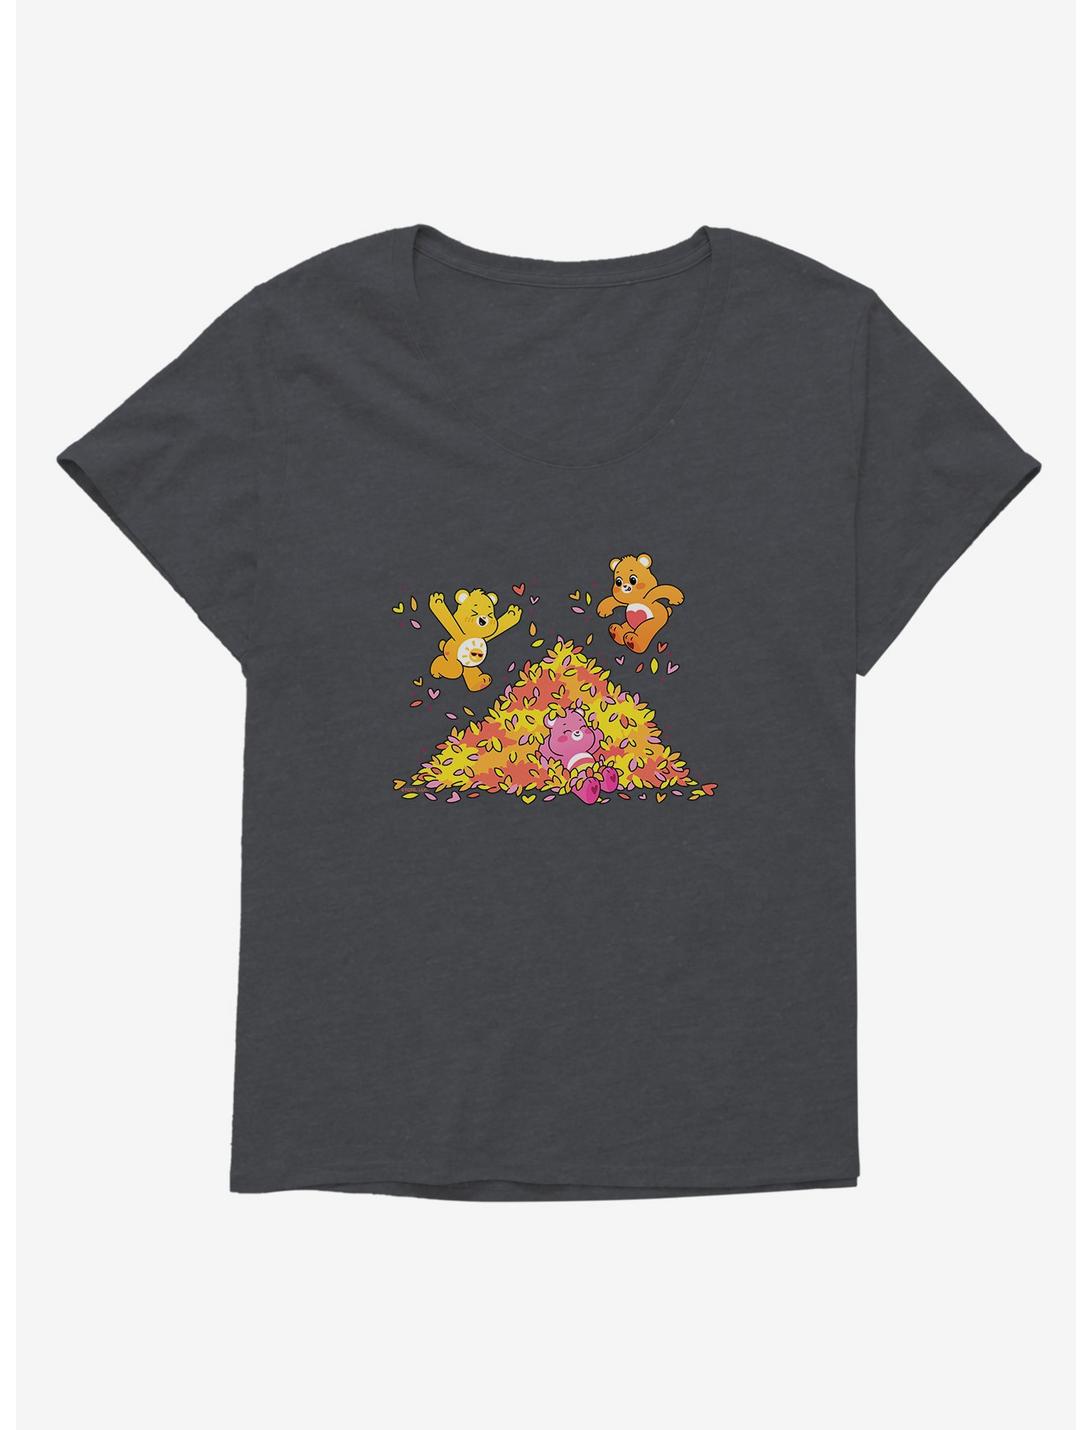 Care Bears Pile Of Leaves Girls T-Shirt Plus Size, , hi-res